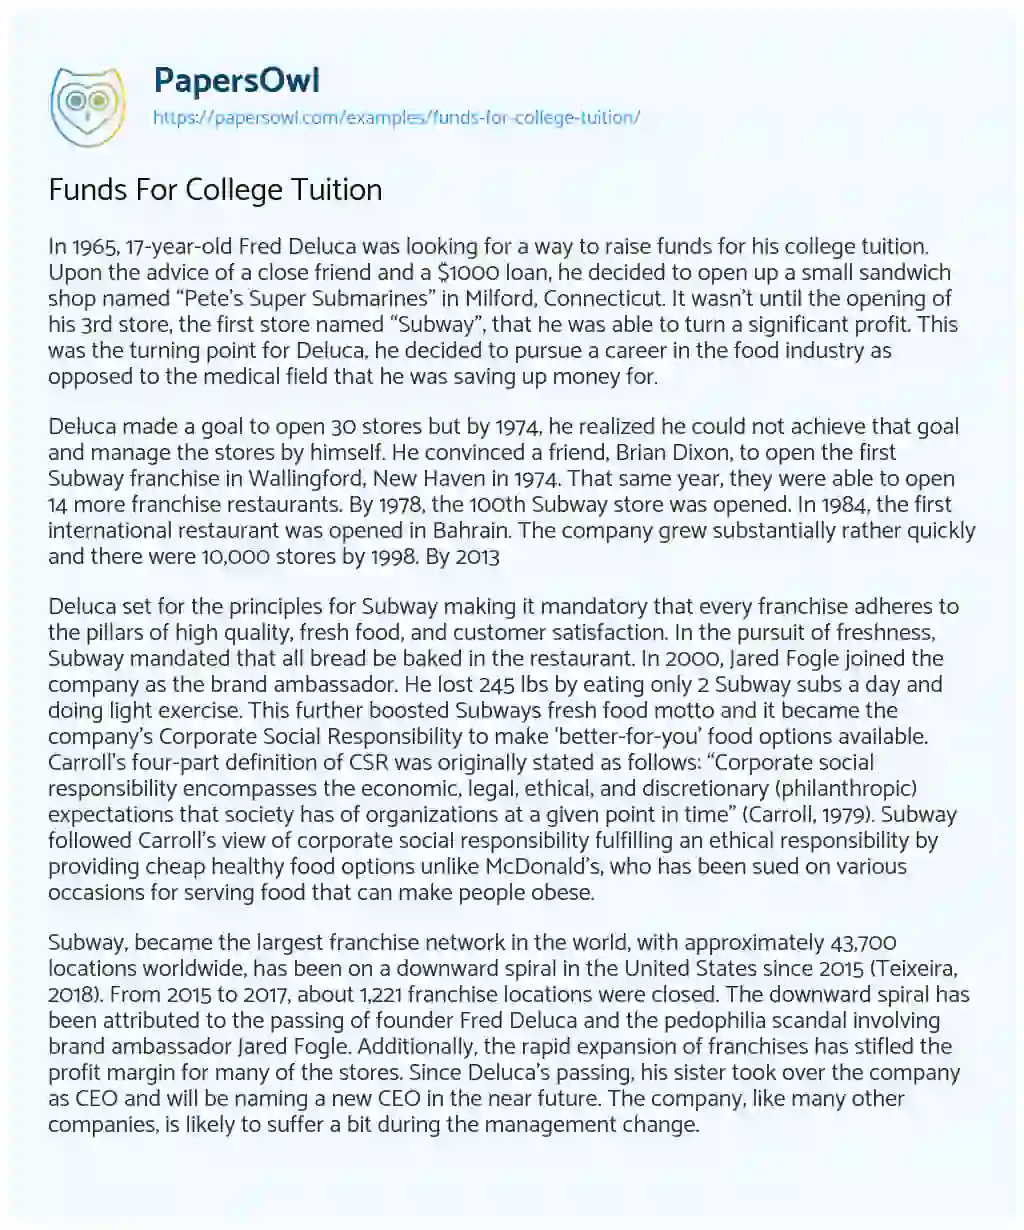 Essay on Funds for College Tuition